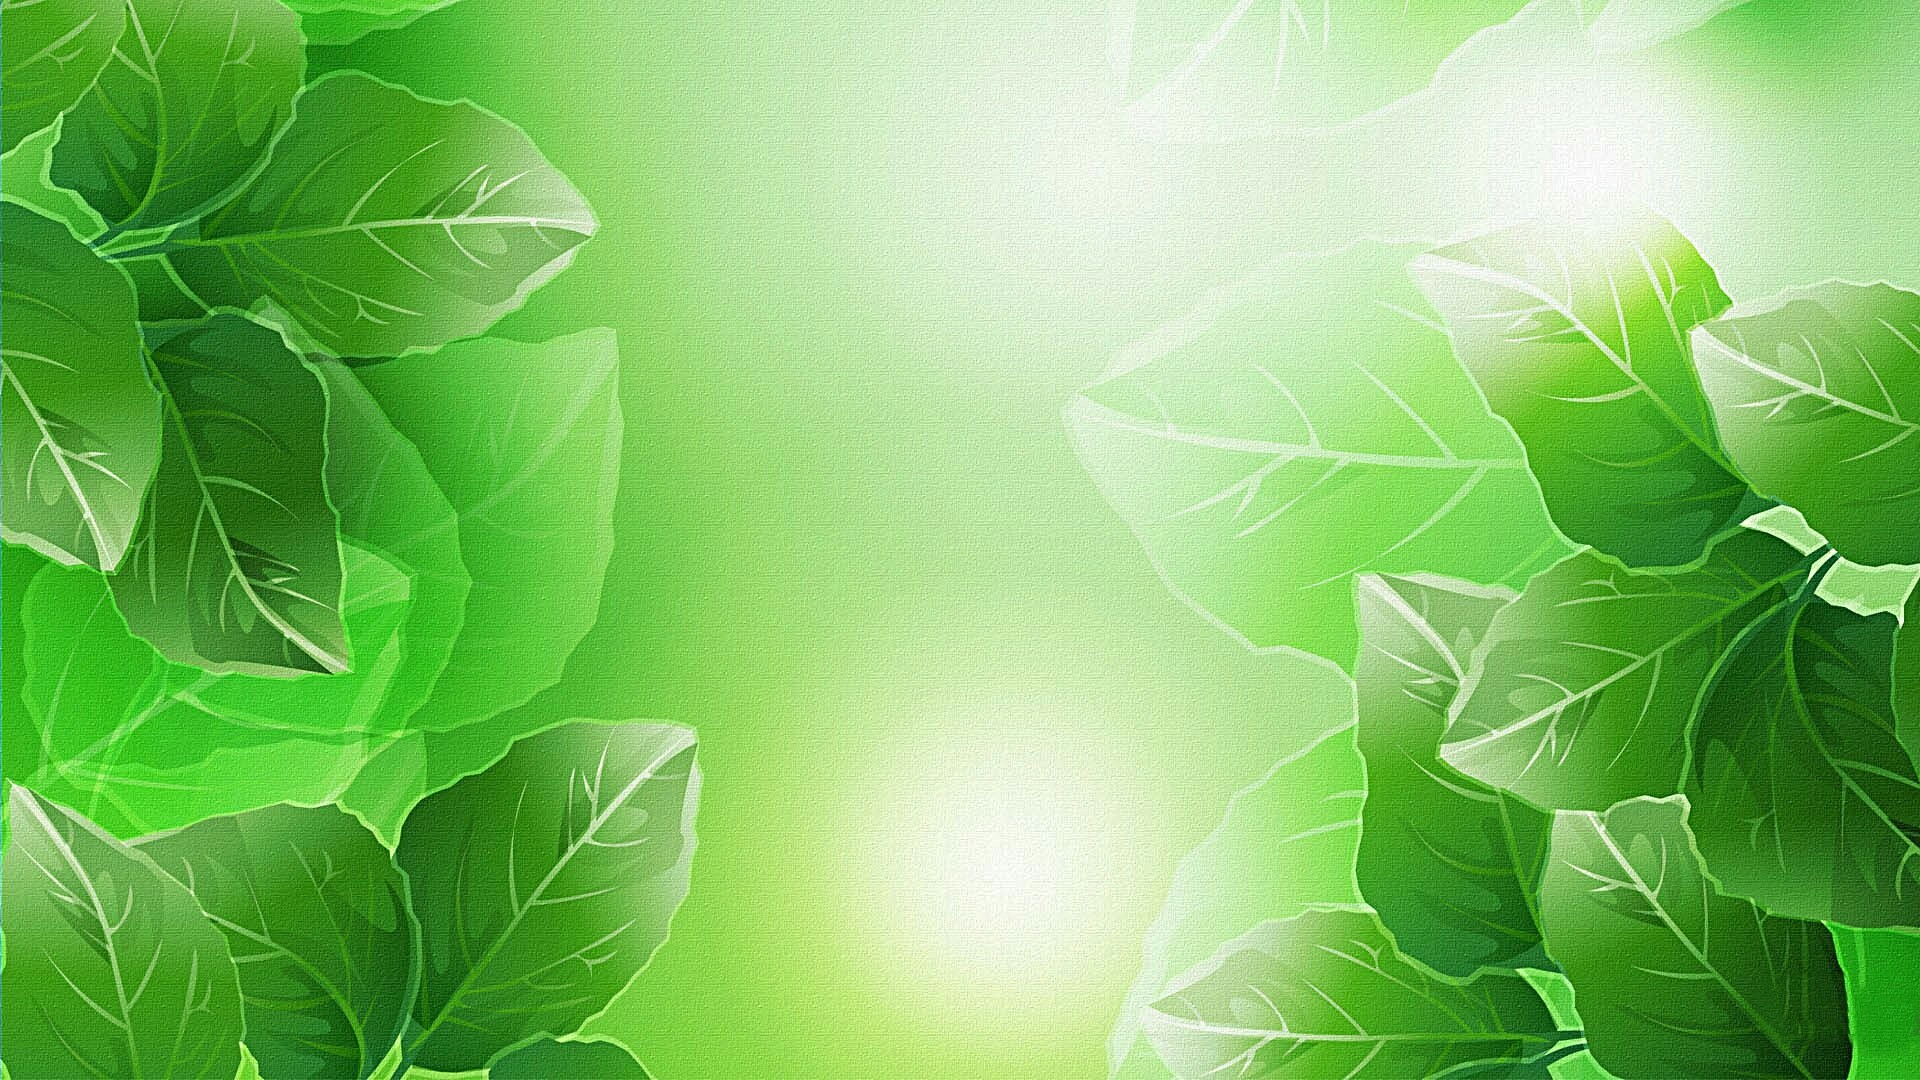 Abstract Leaves wallpaper hd